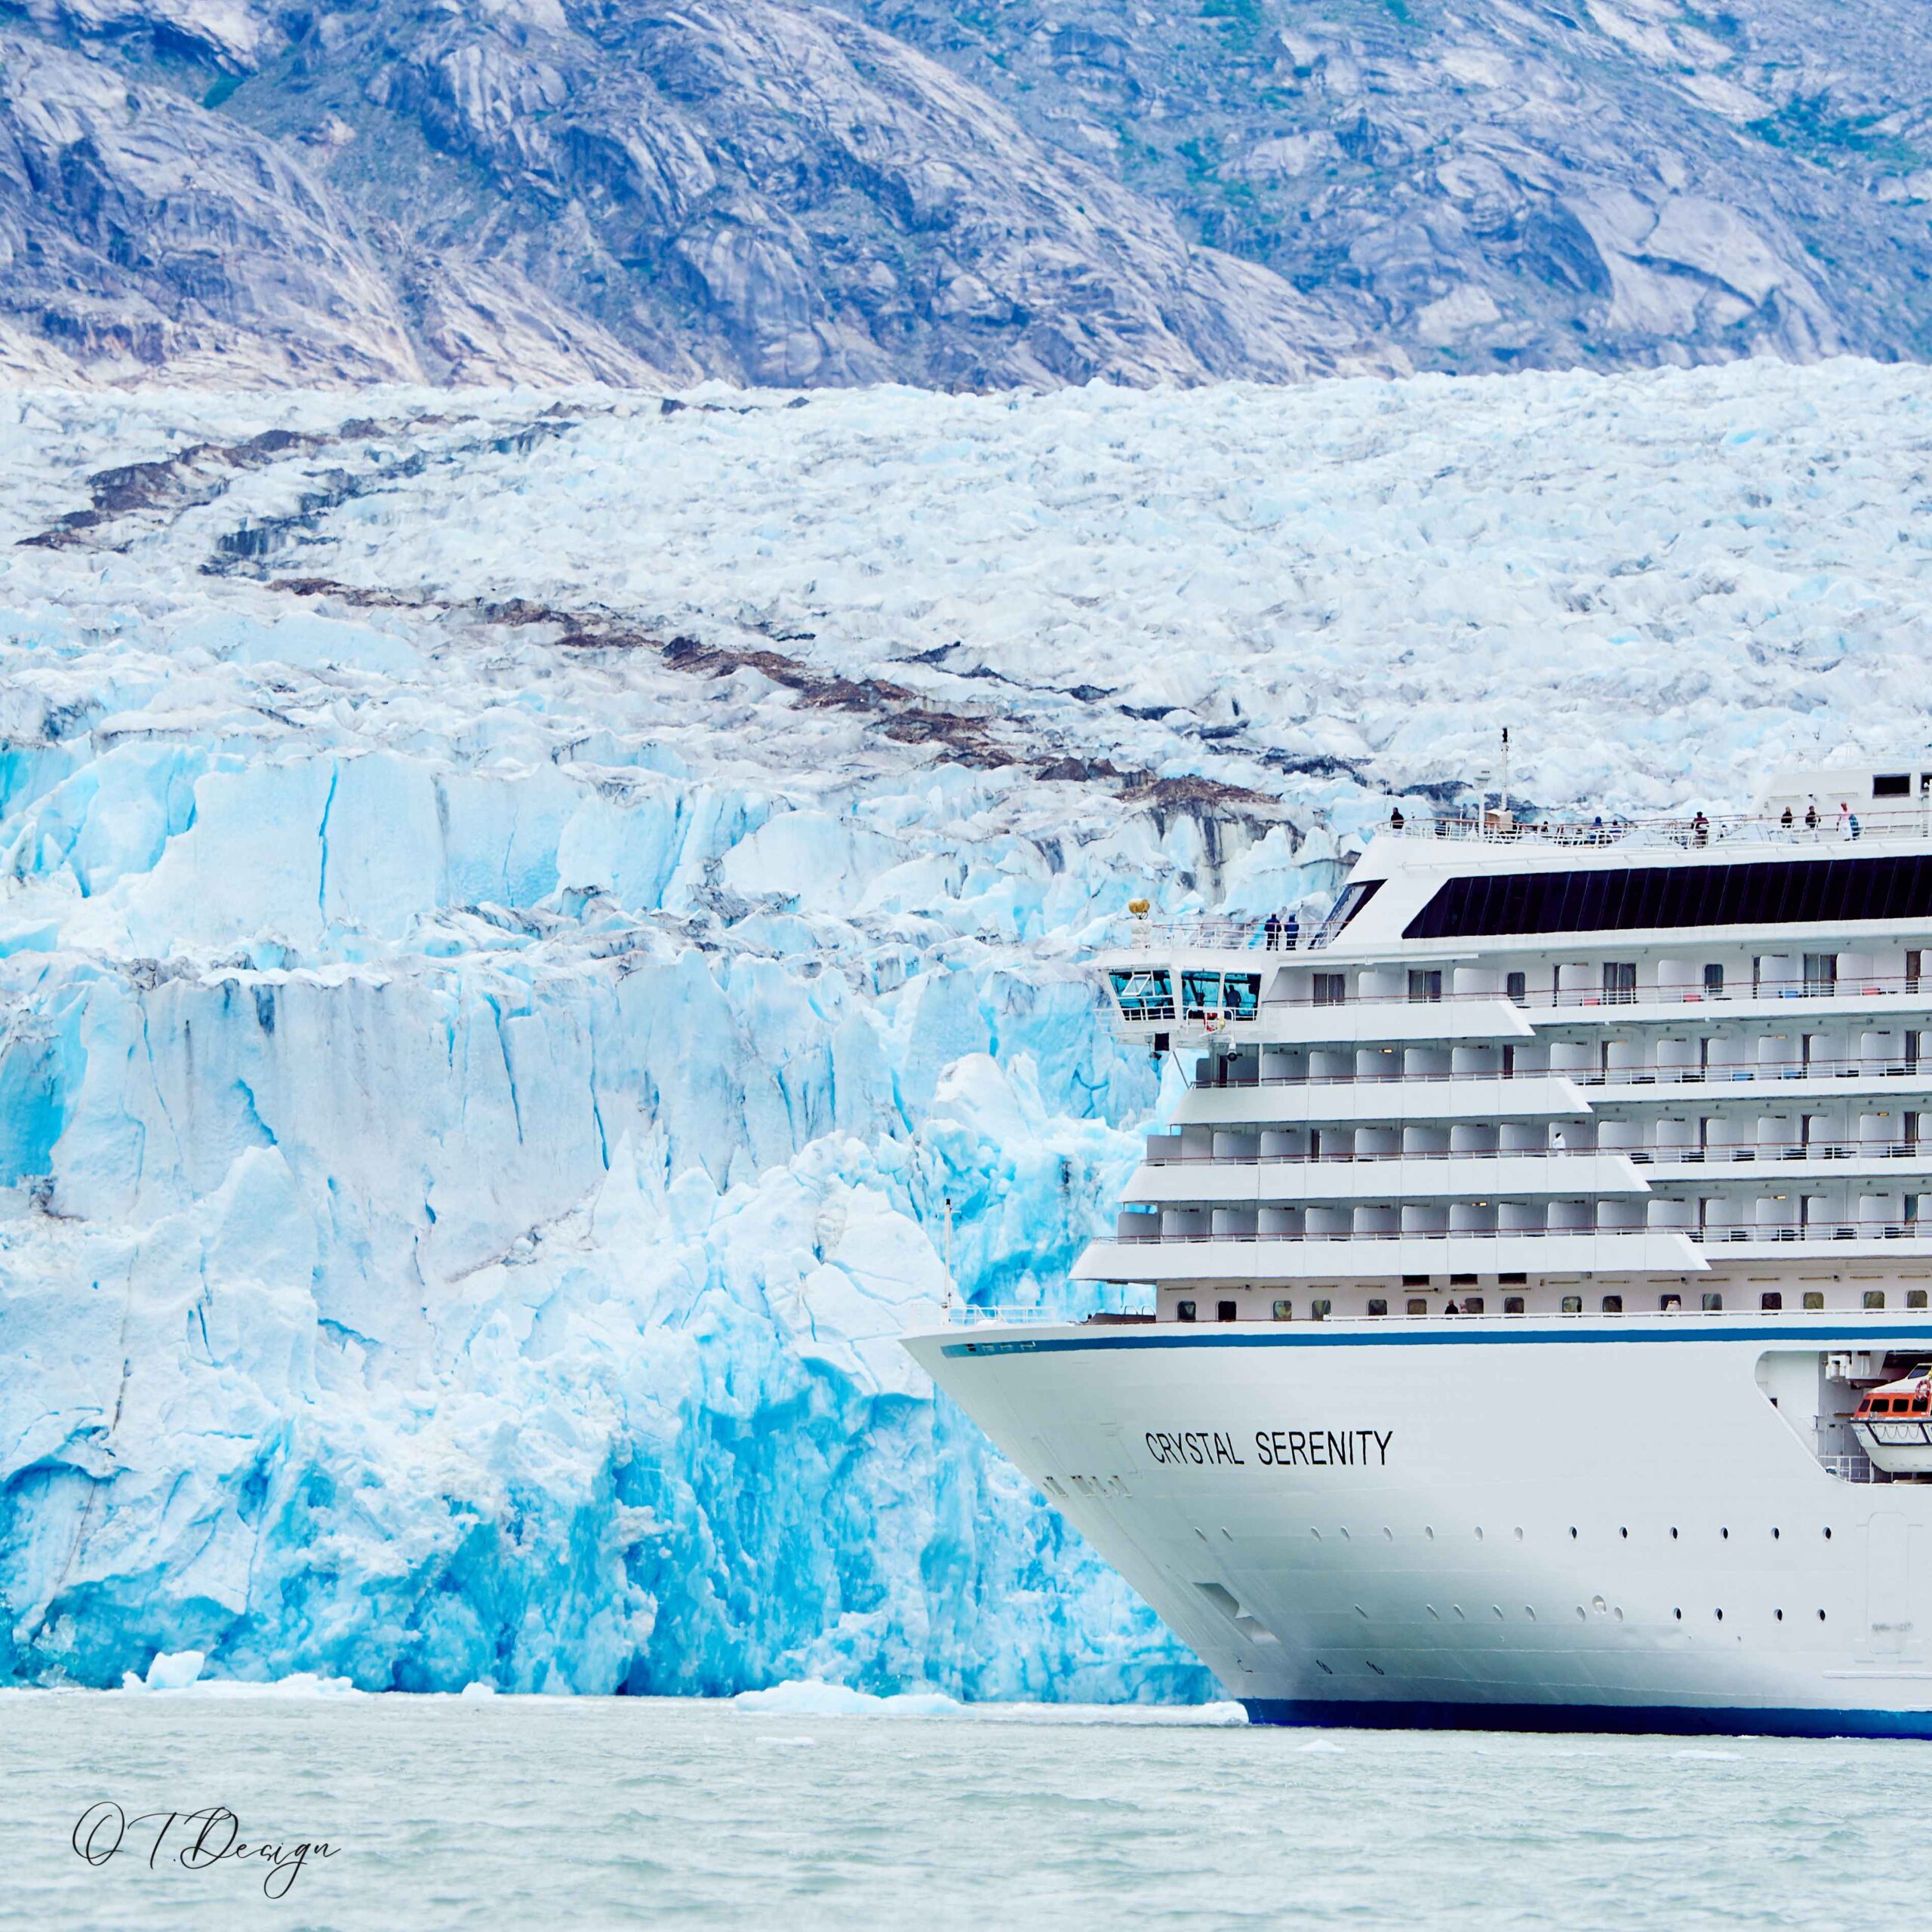 Crystal Serenity in front of the majestic ice glacier in Endicott Arm, Alaska